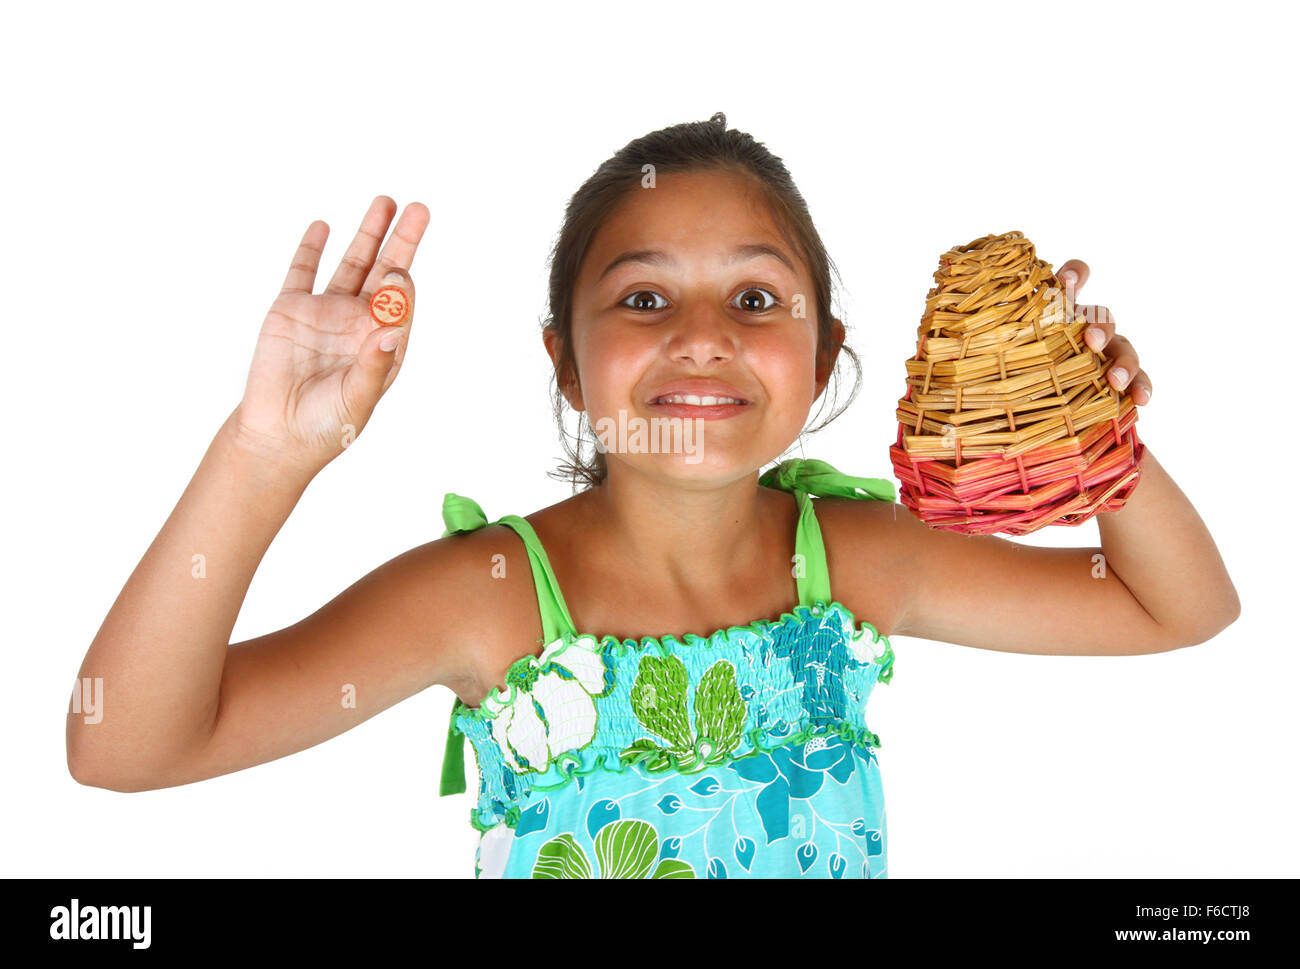 Little girl with basket of numbers for bingo on white background Stock Photo